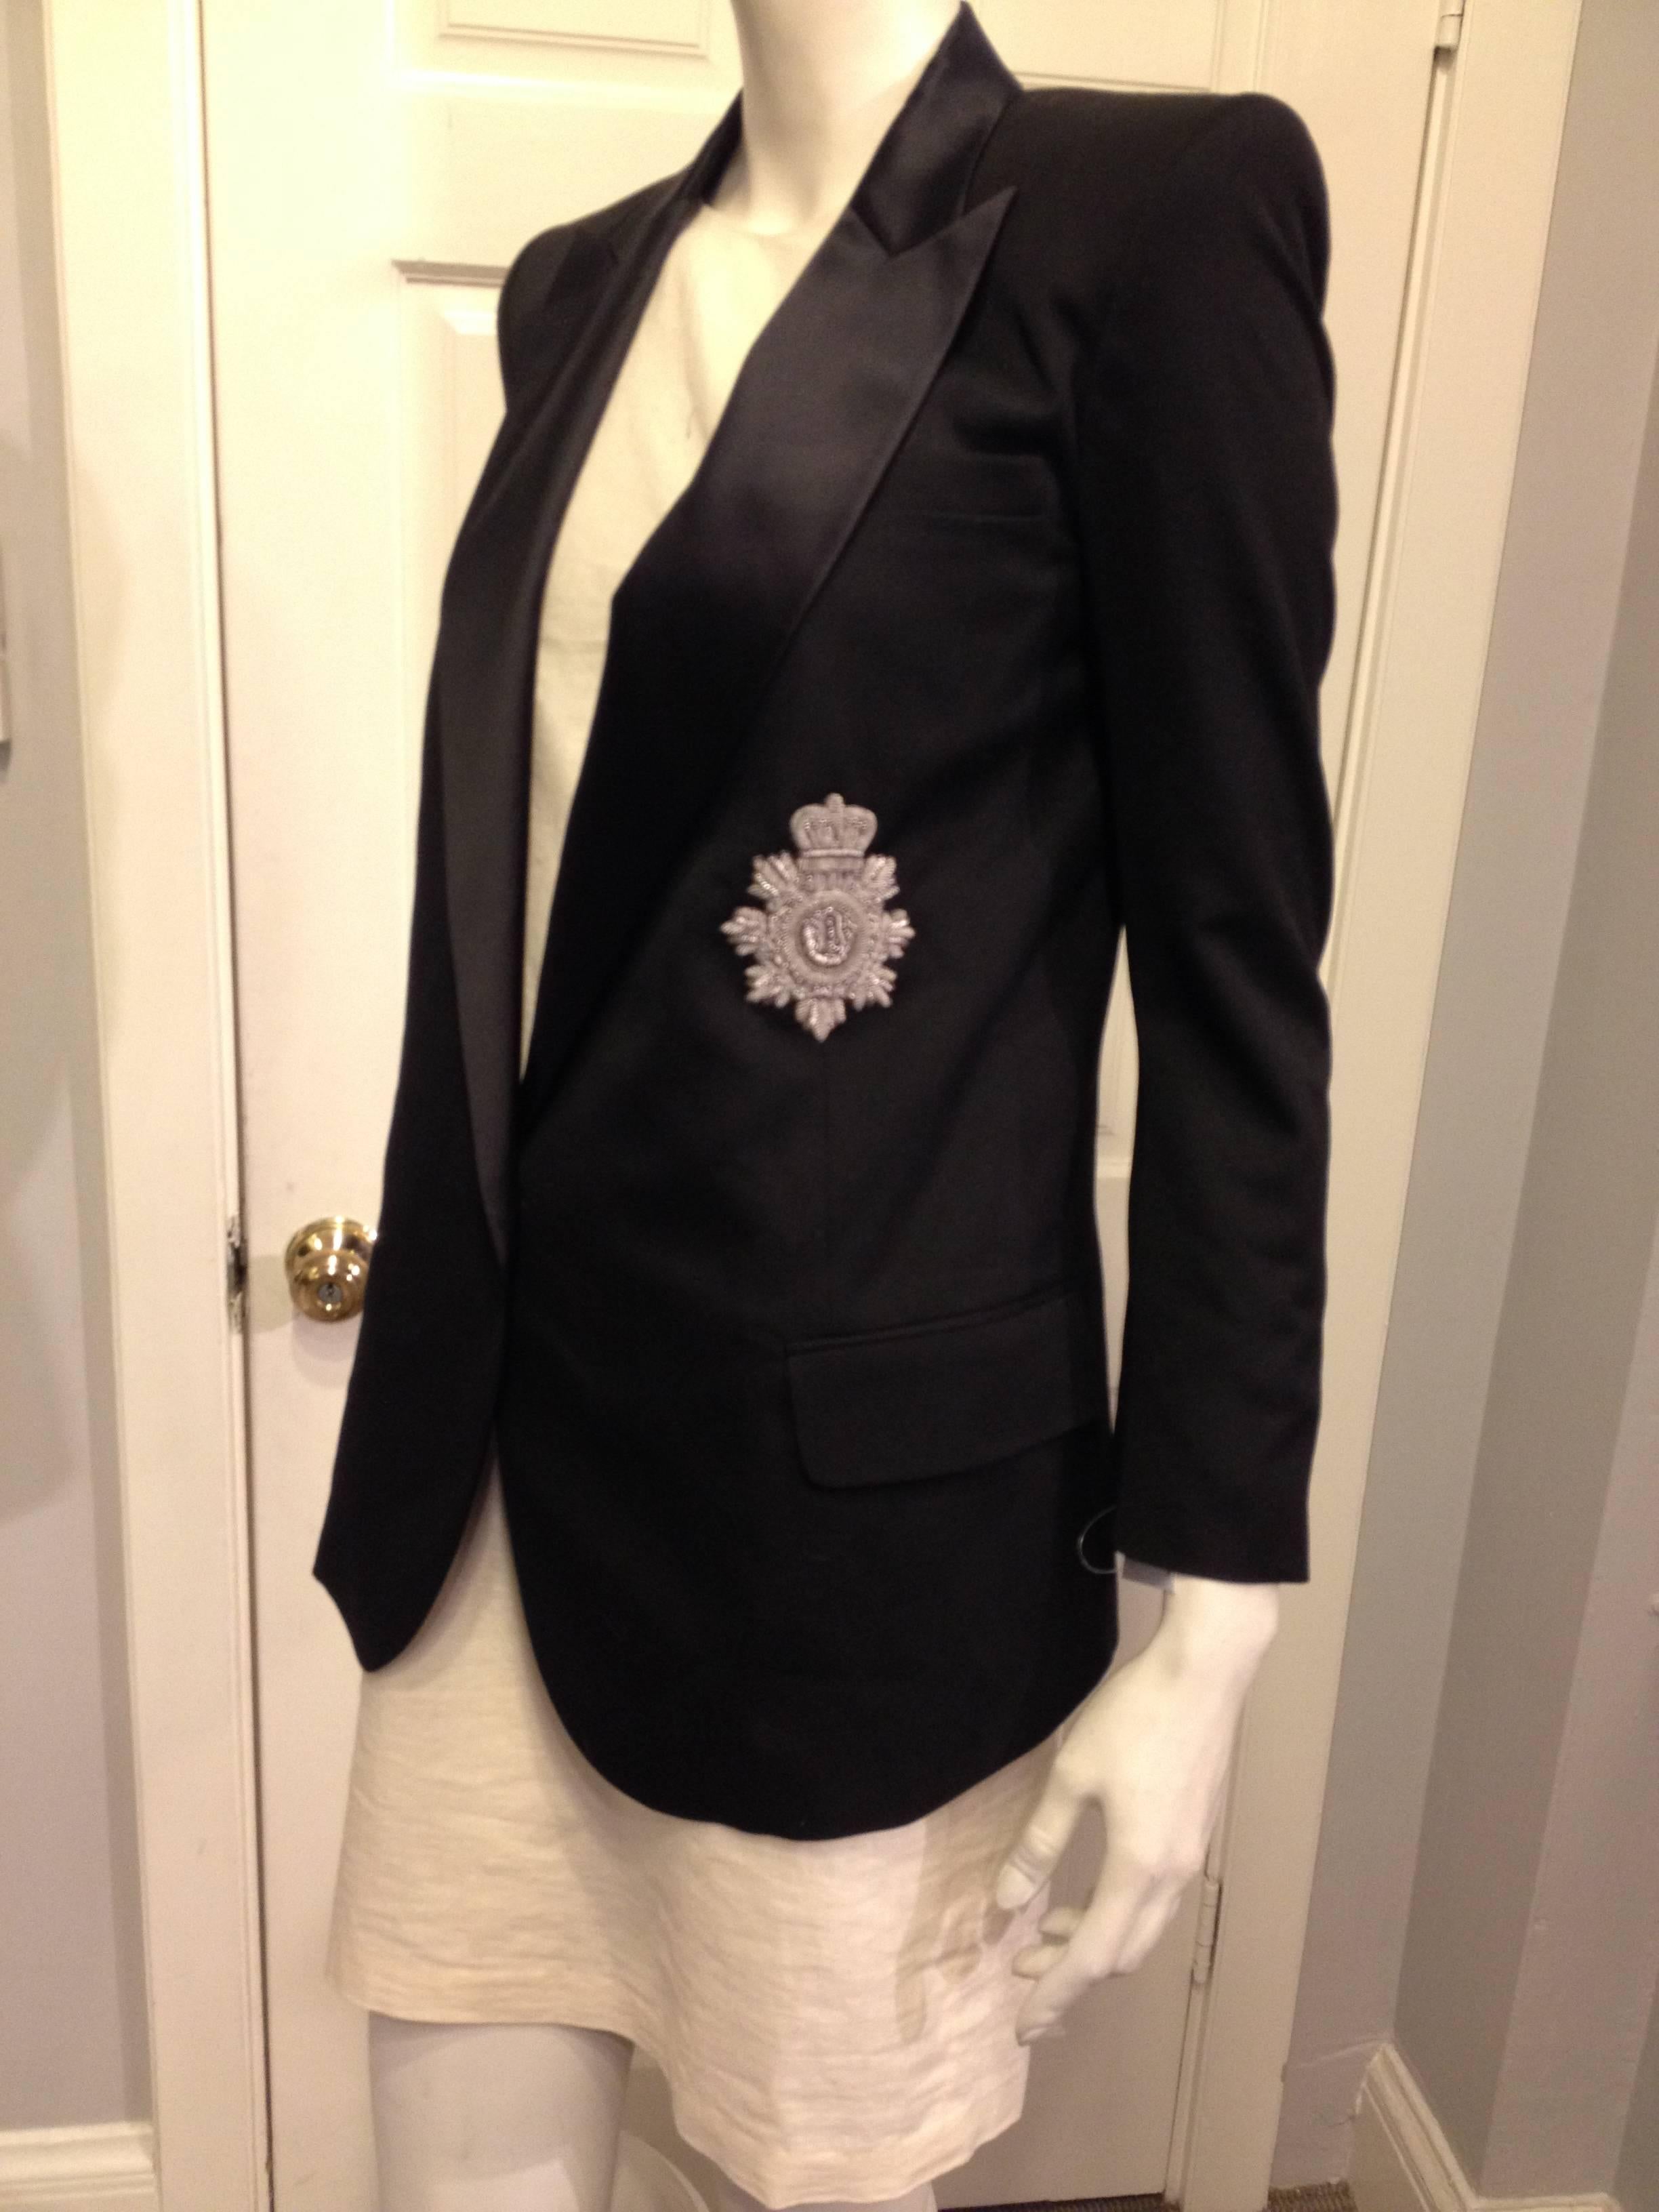 Show your allegiance to Balmain in this gorgeous black tuxedo jacket. Cut sharply with a plunging neckline and single button front, this piece is just amazing - the satin lapels contrast wonderfully with the twill body, and the short bracelet length